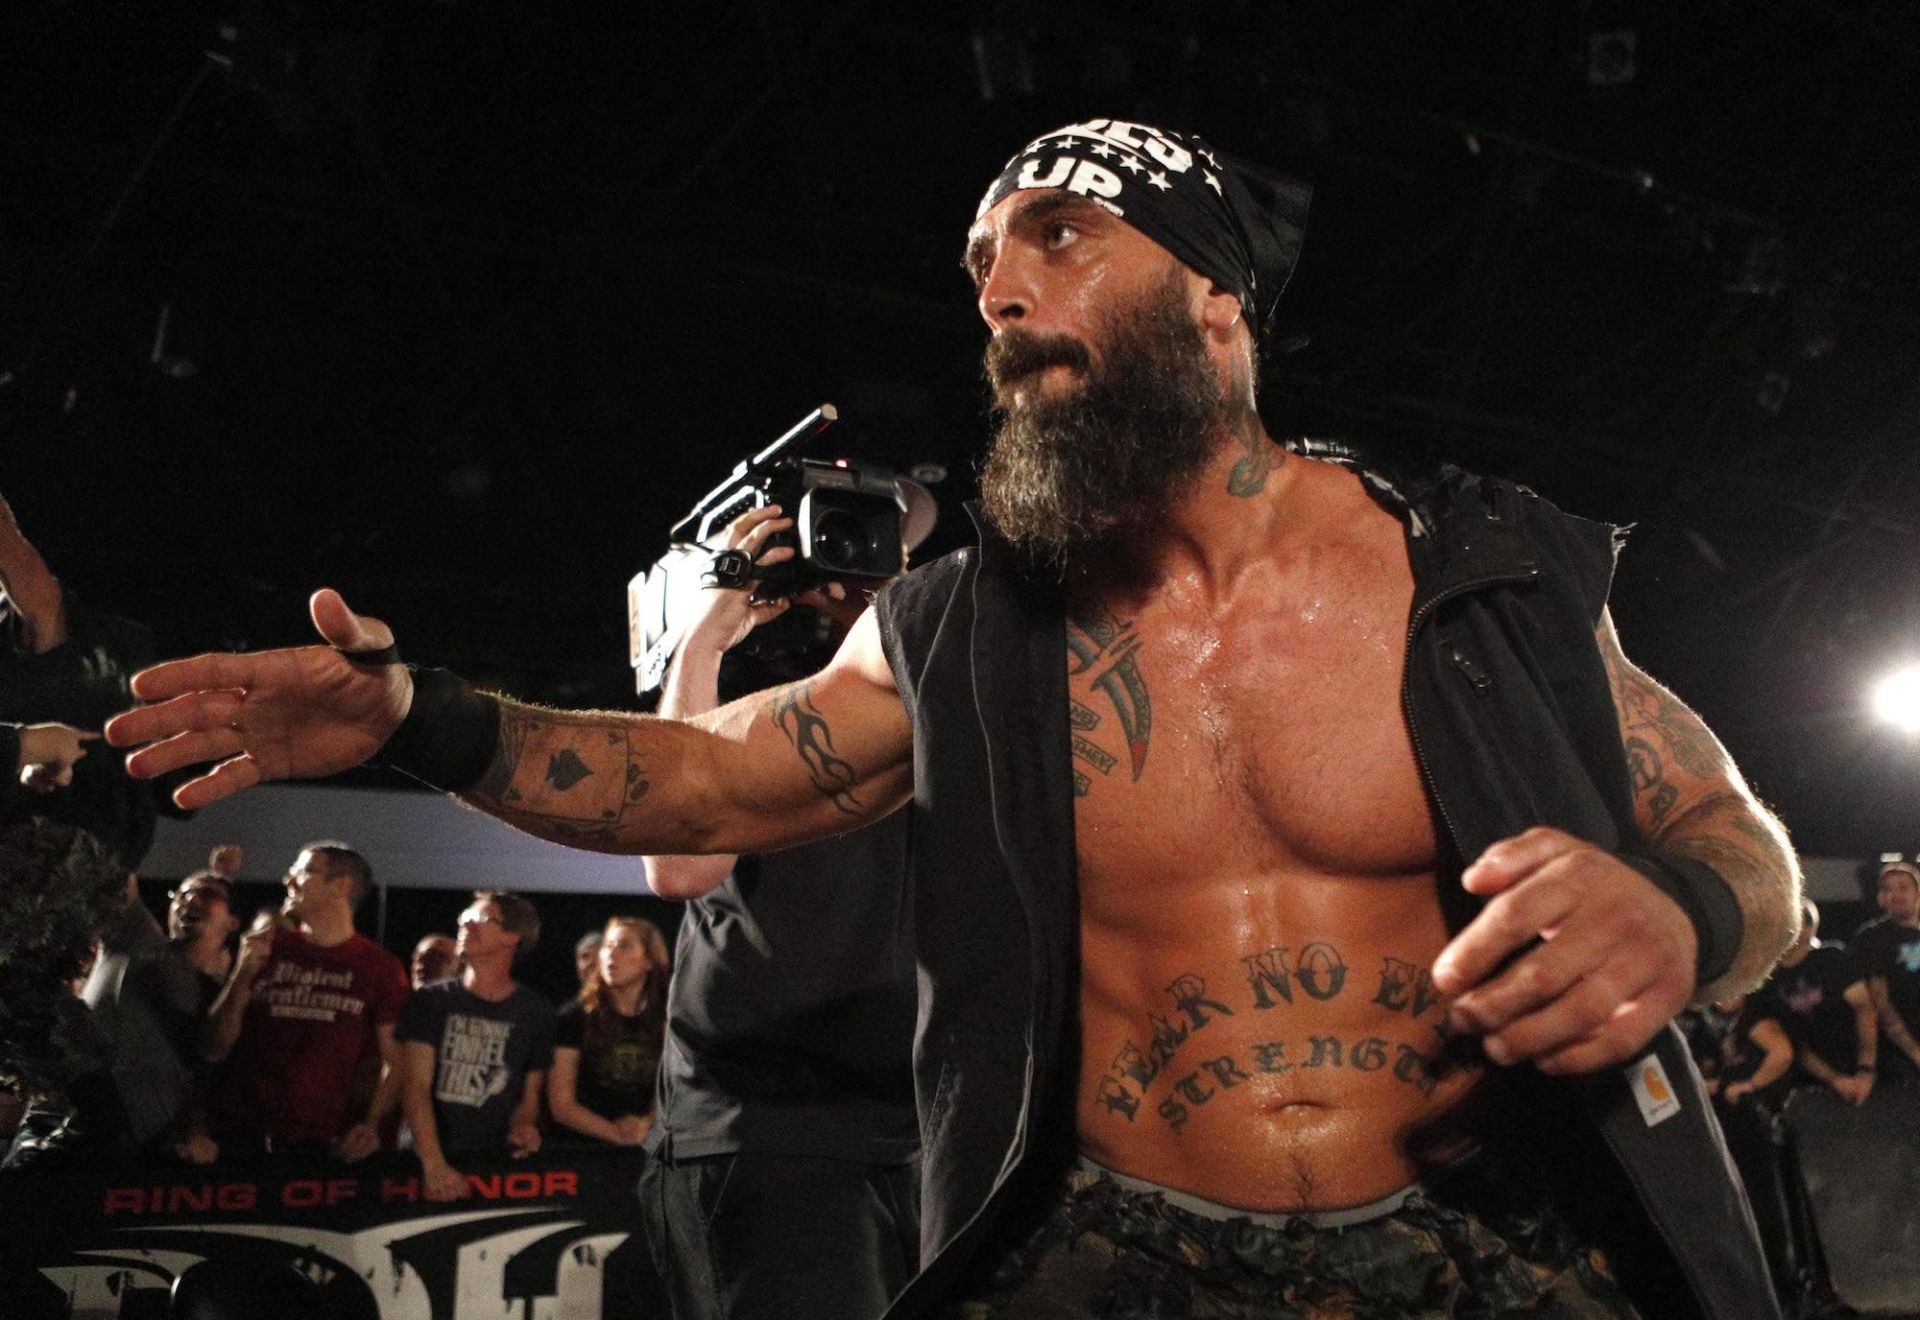 Jay Briscoe was an icon outside WWE.